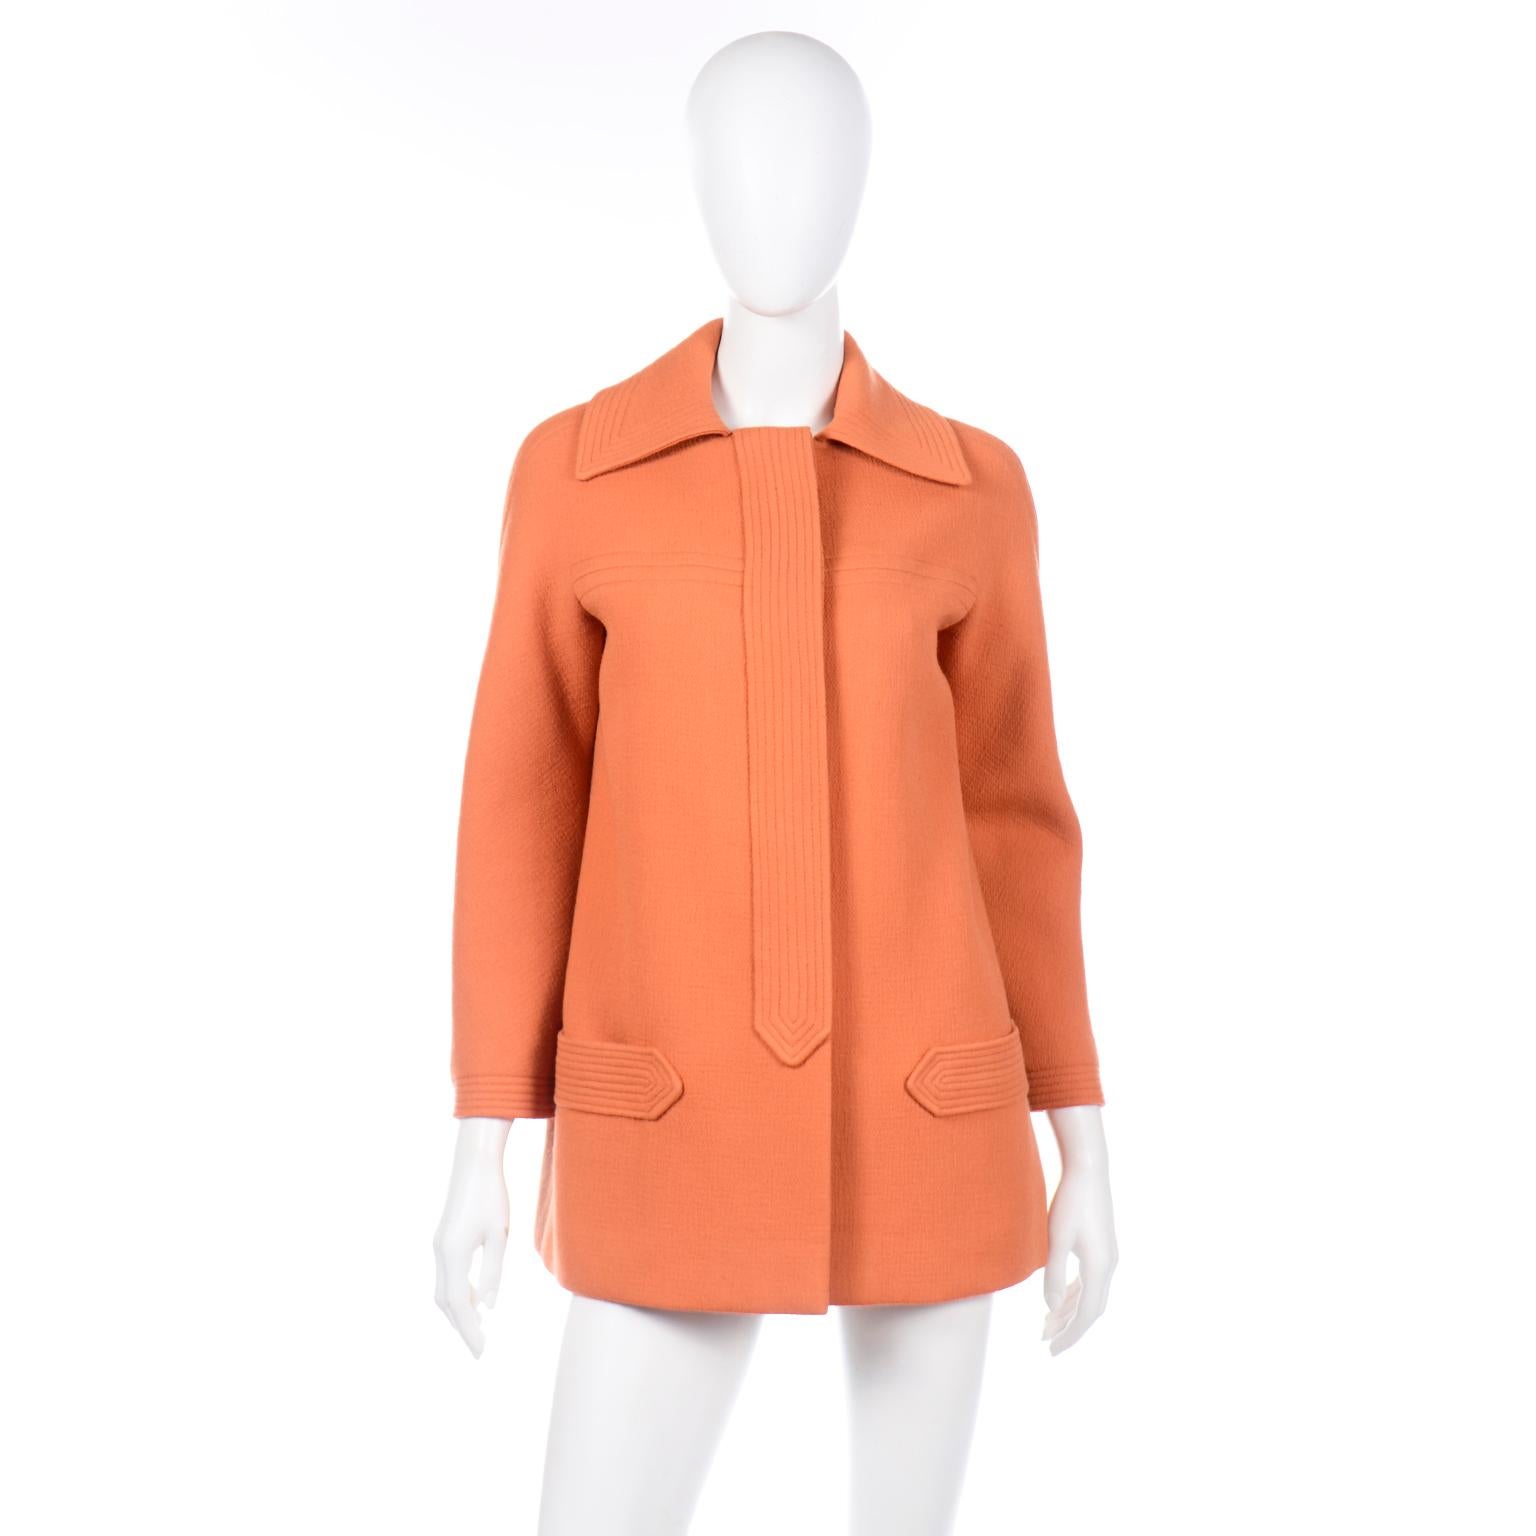 This vintage late 1960's or early 1970's Pierre Cardin orange wool jacket is such an iconic piece that will fit into any modern wardrobe!. This fabulous jacket has a pointed collar, placket covered buttons and two deep pockets at the hips. You will